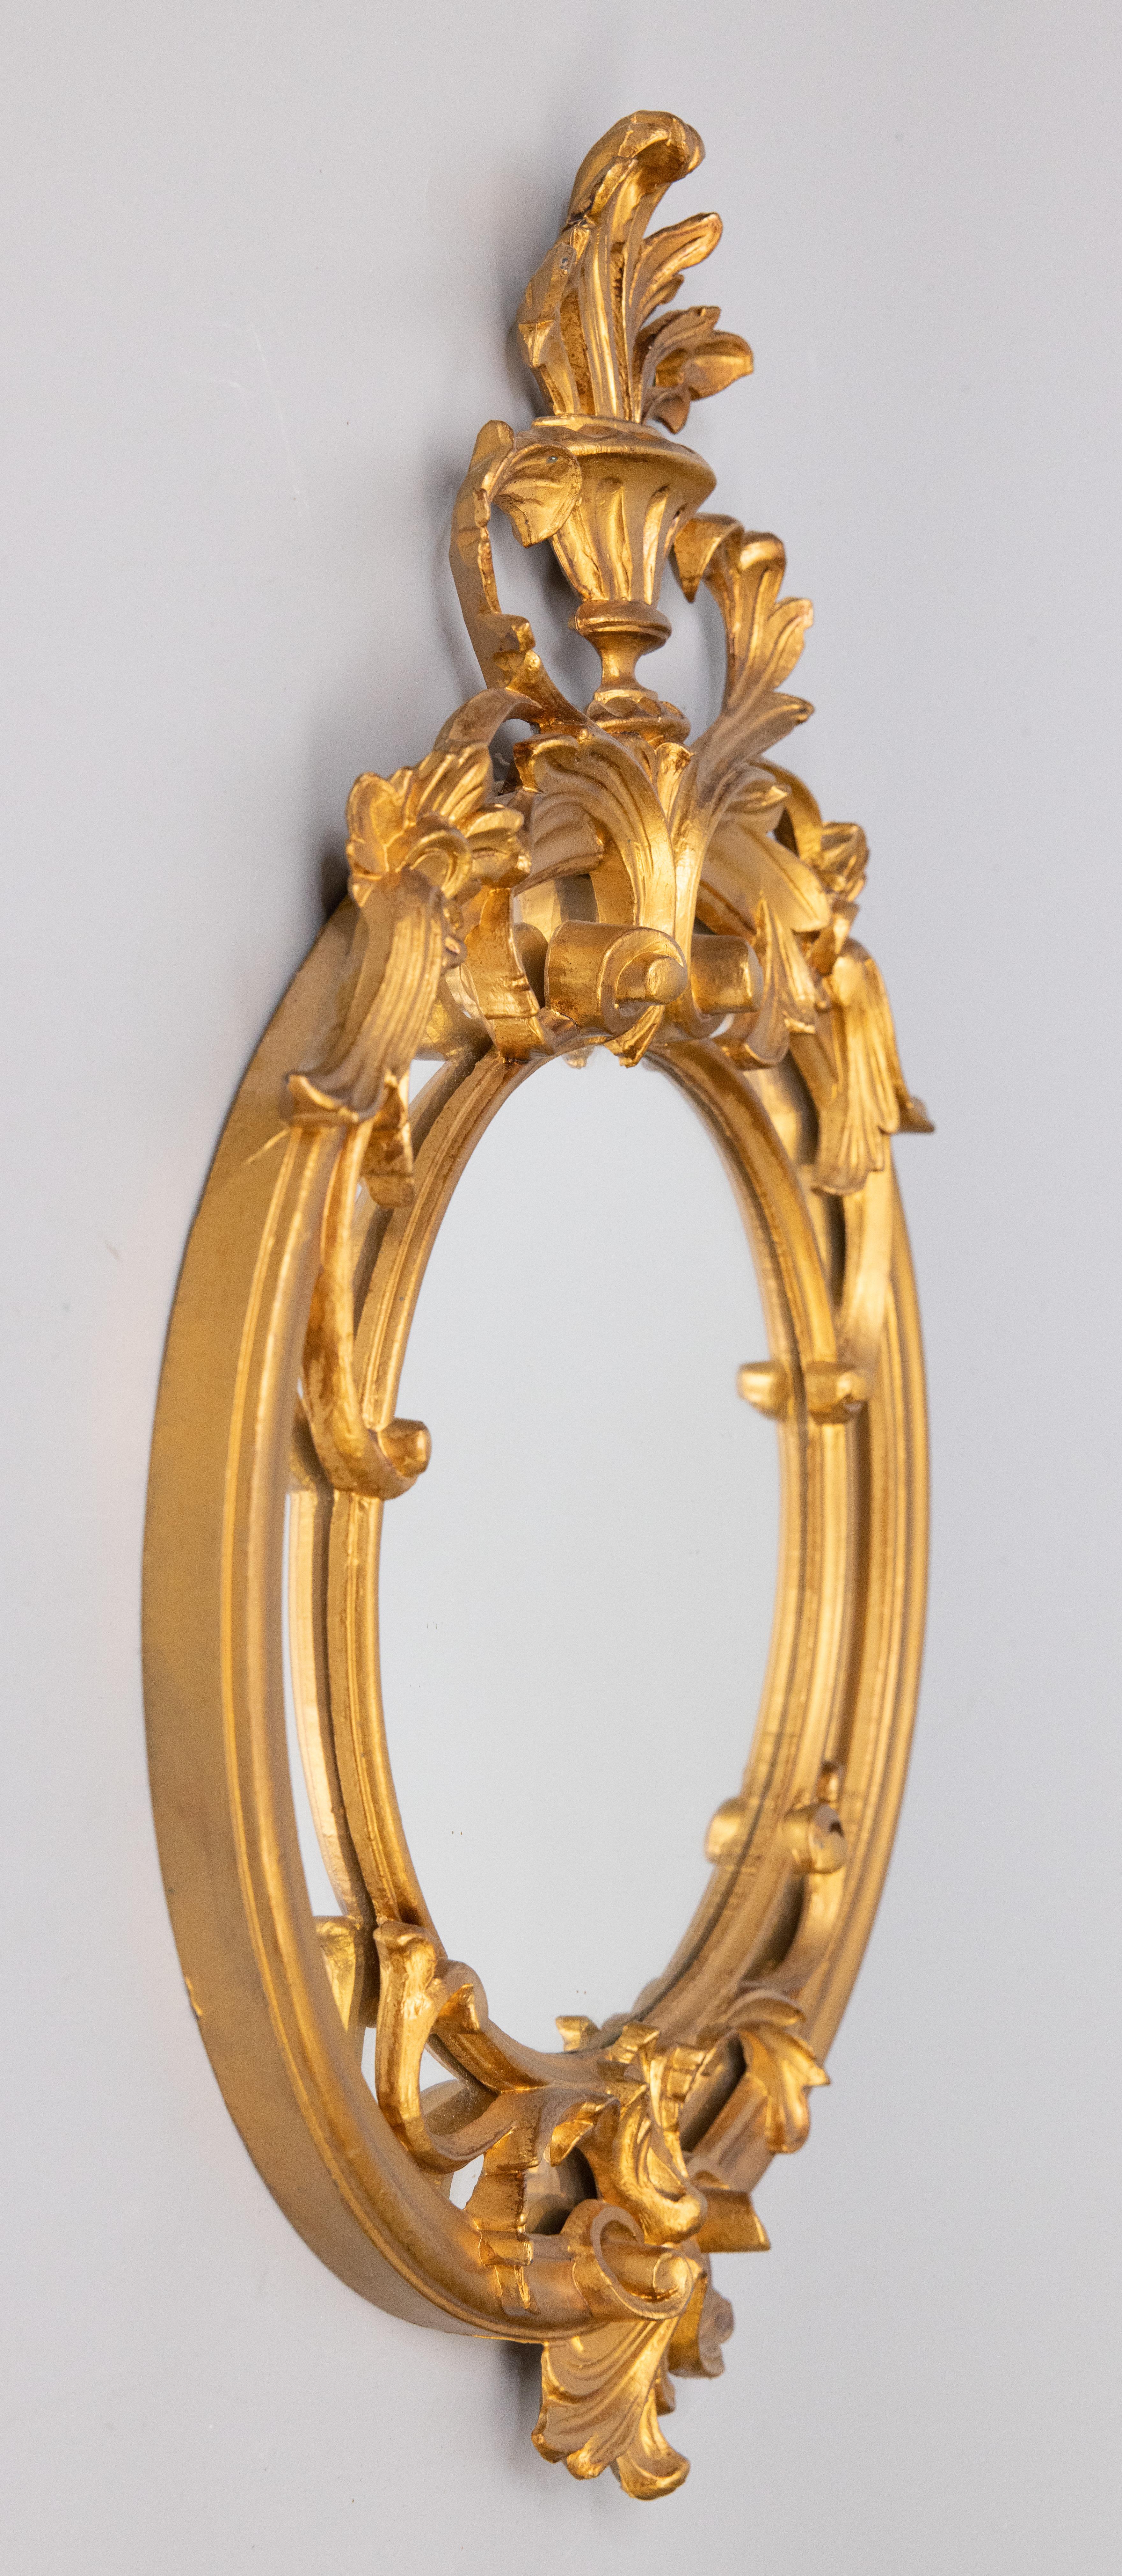 Vintage Italian Neoclassical Style Gilt Resin Mirror with Crest In Good Condition For Sale In Pearland, TX